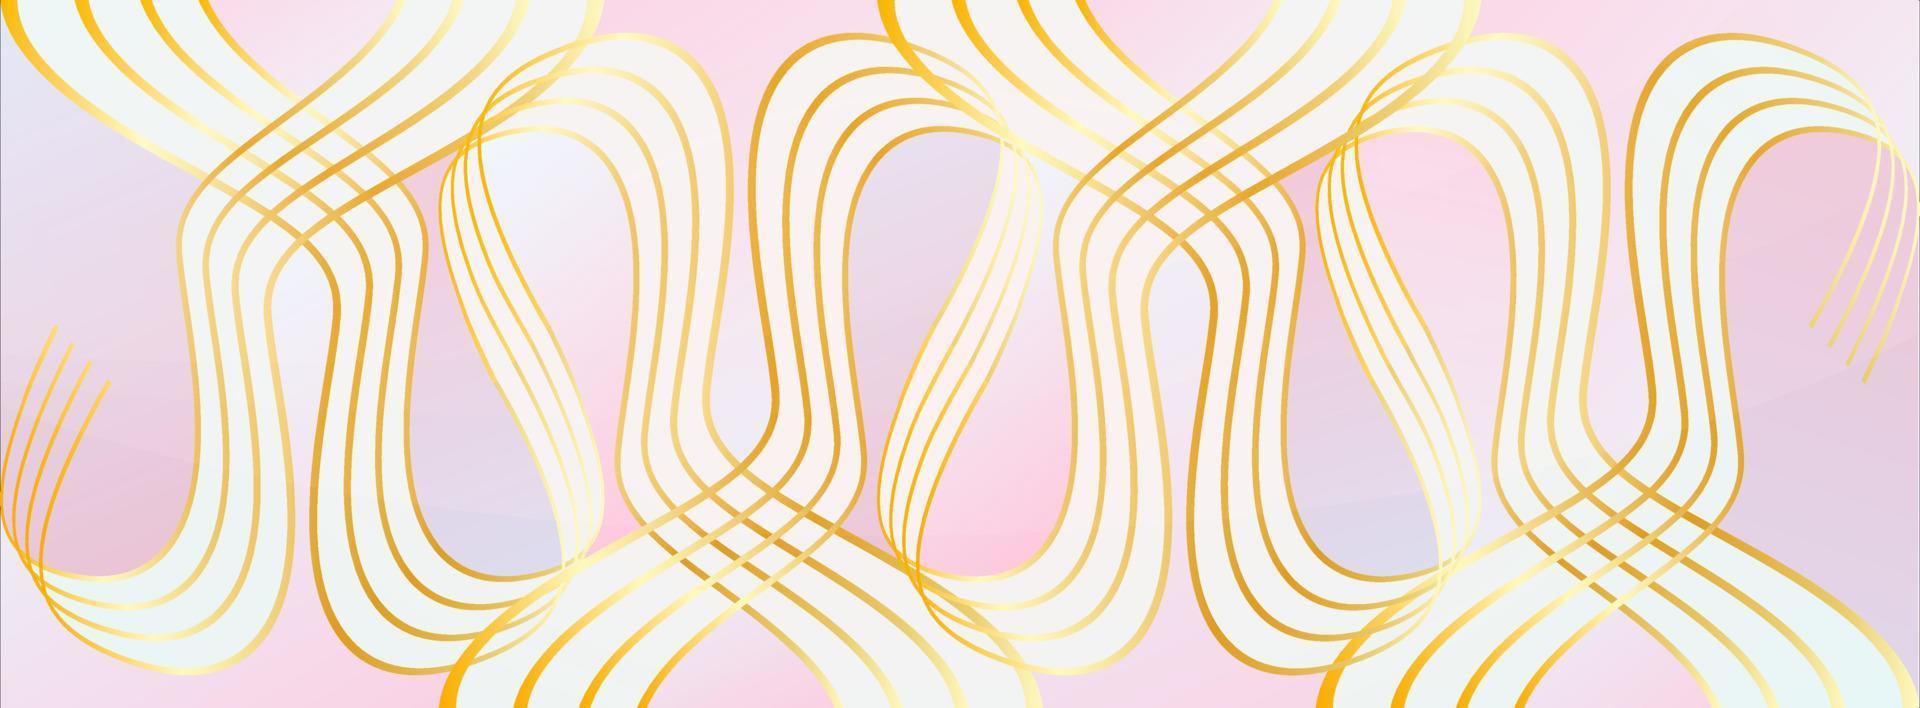 Golden lines with Soft color vector